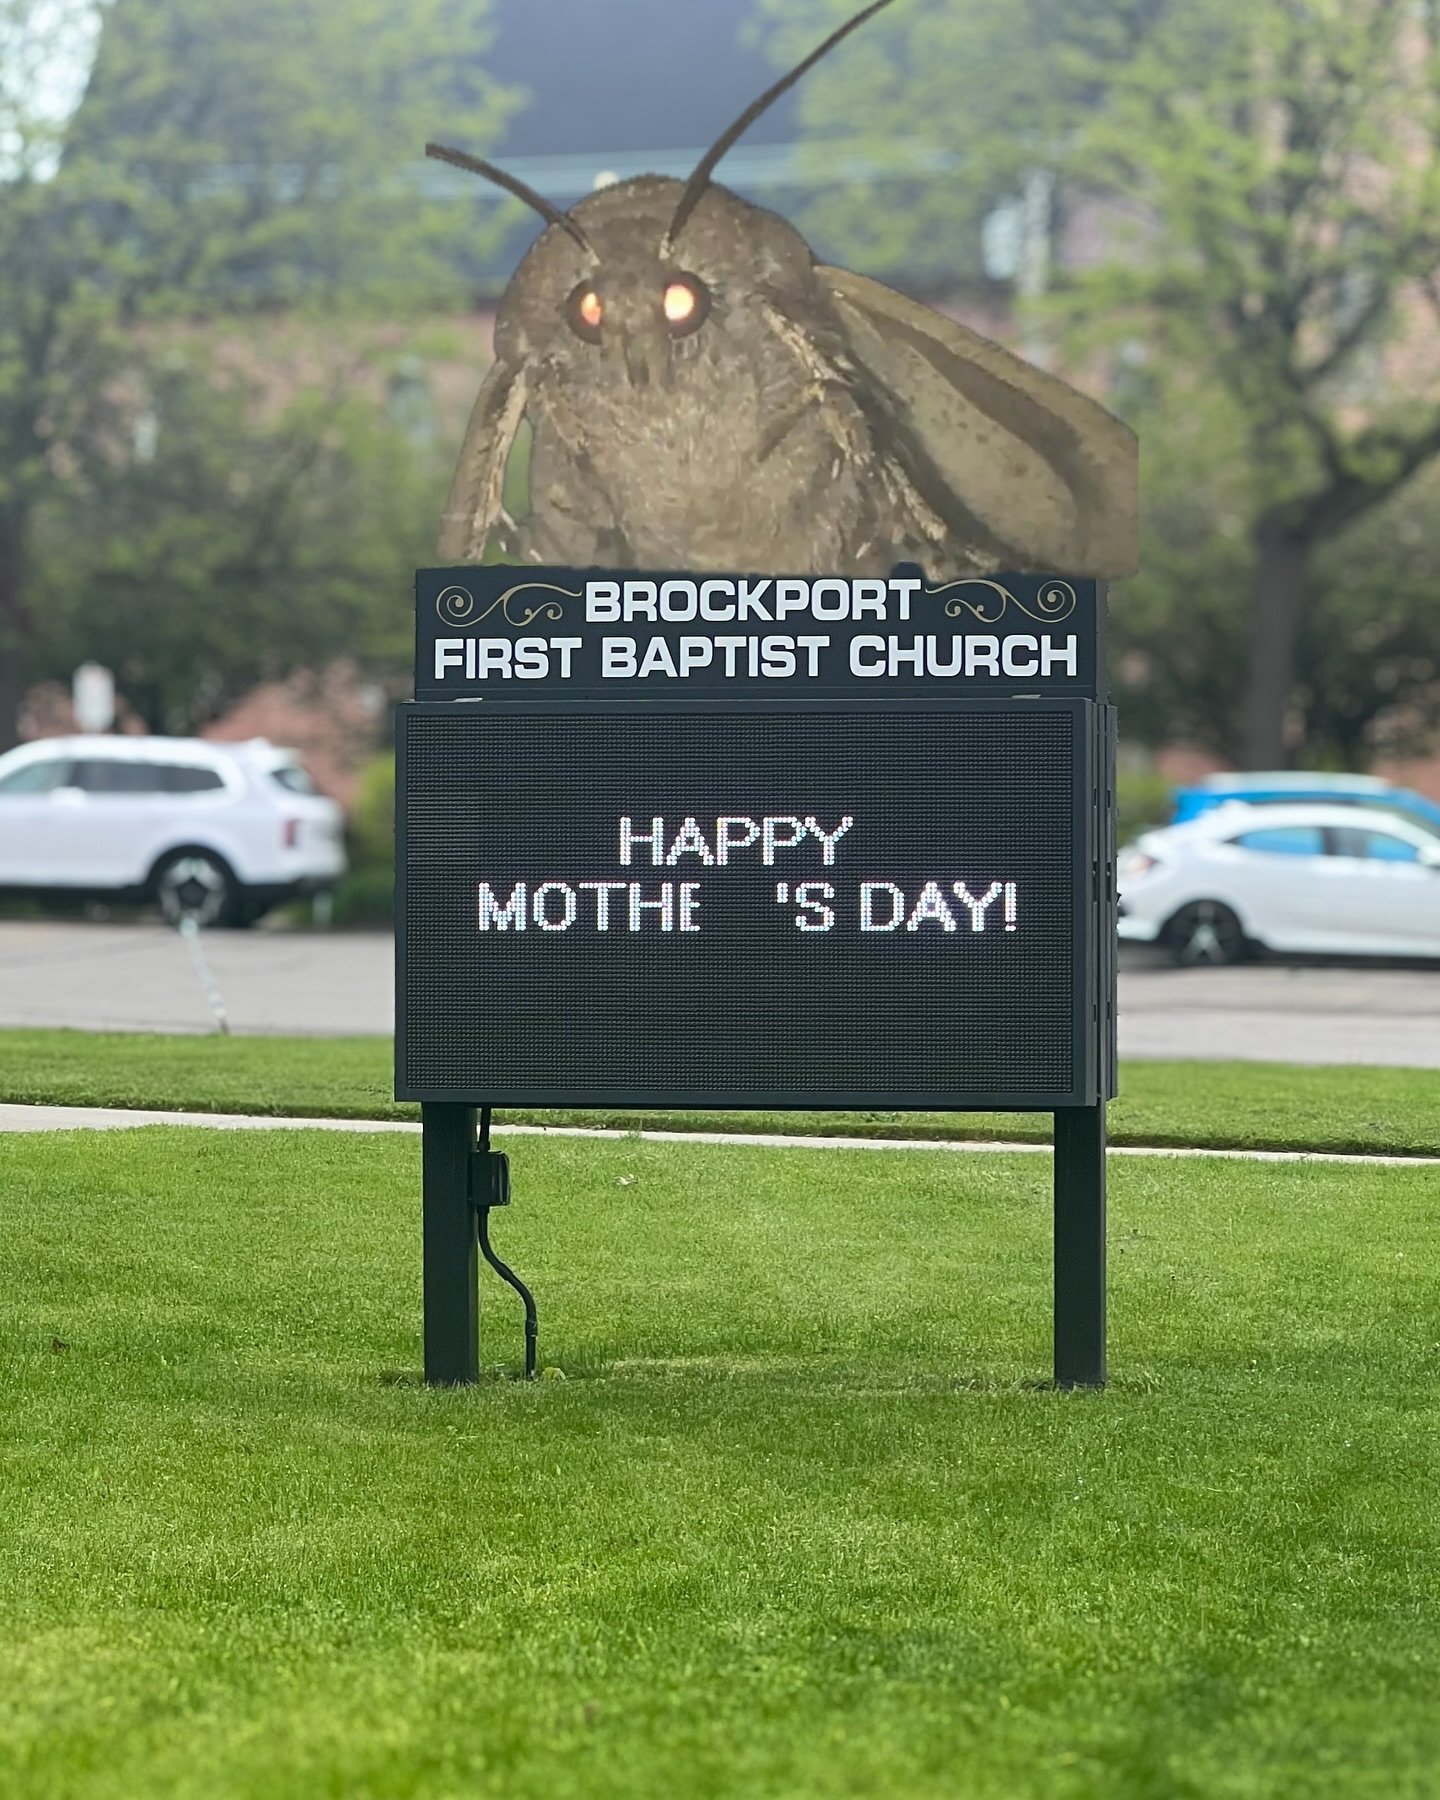 Hope all the Moths and Mothers are having a Happy Mother&rsquo;s Day! 

Enjoy the glitch in our sign today. 😂